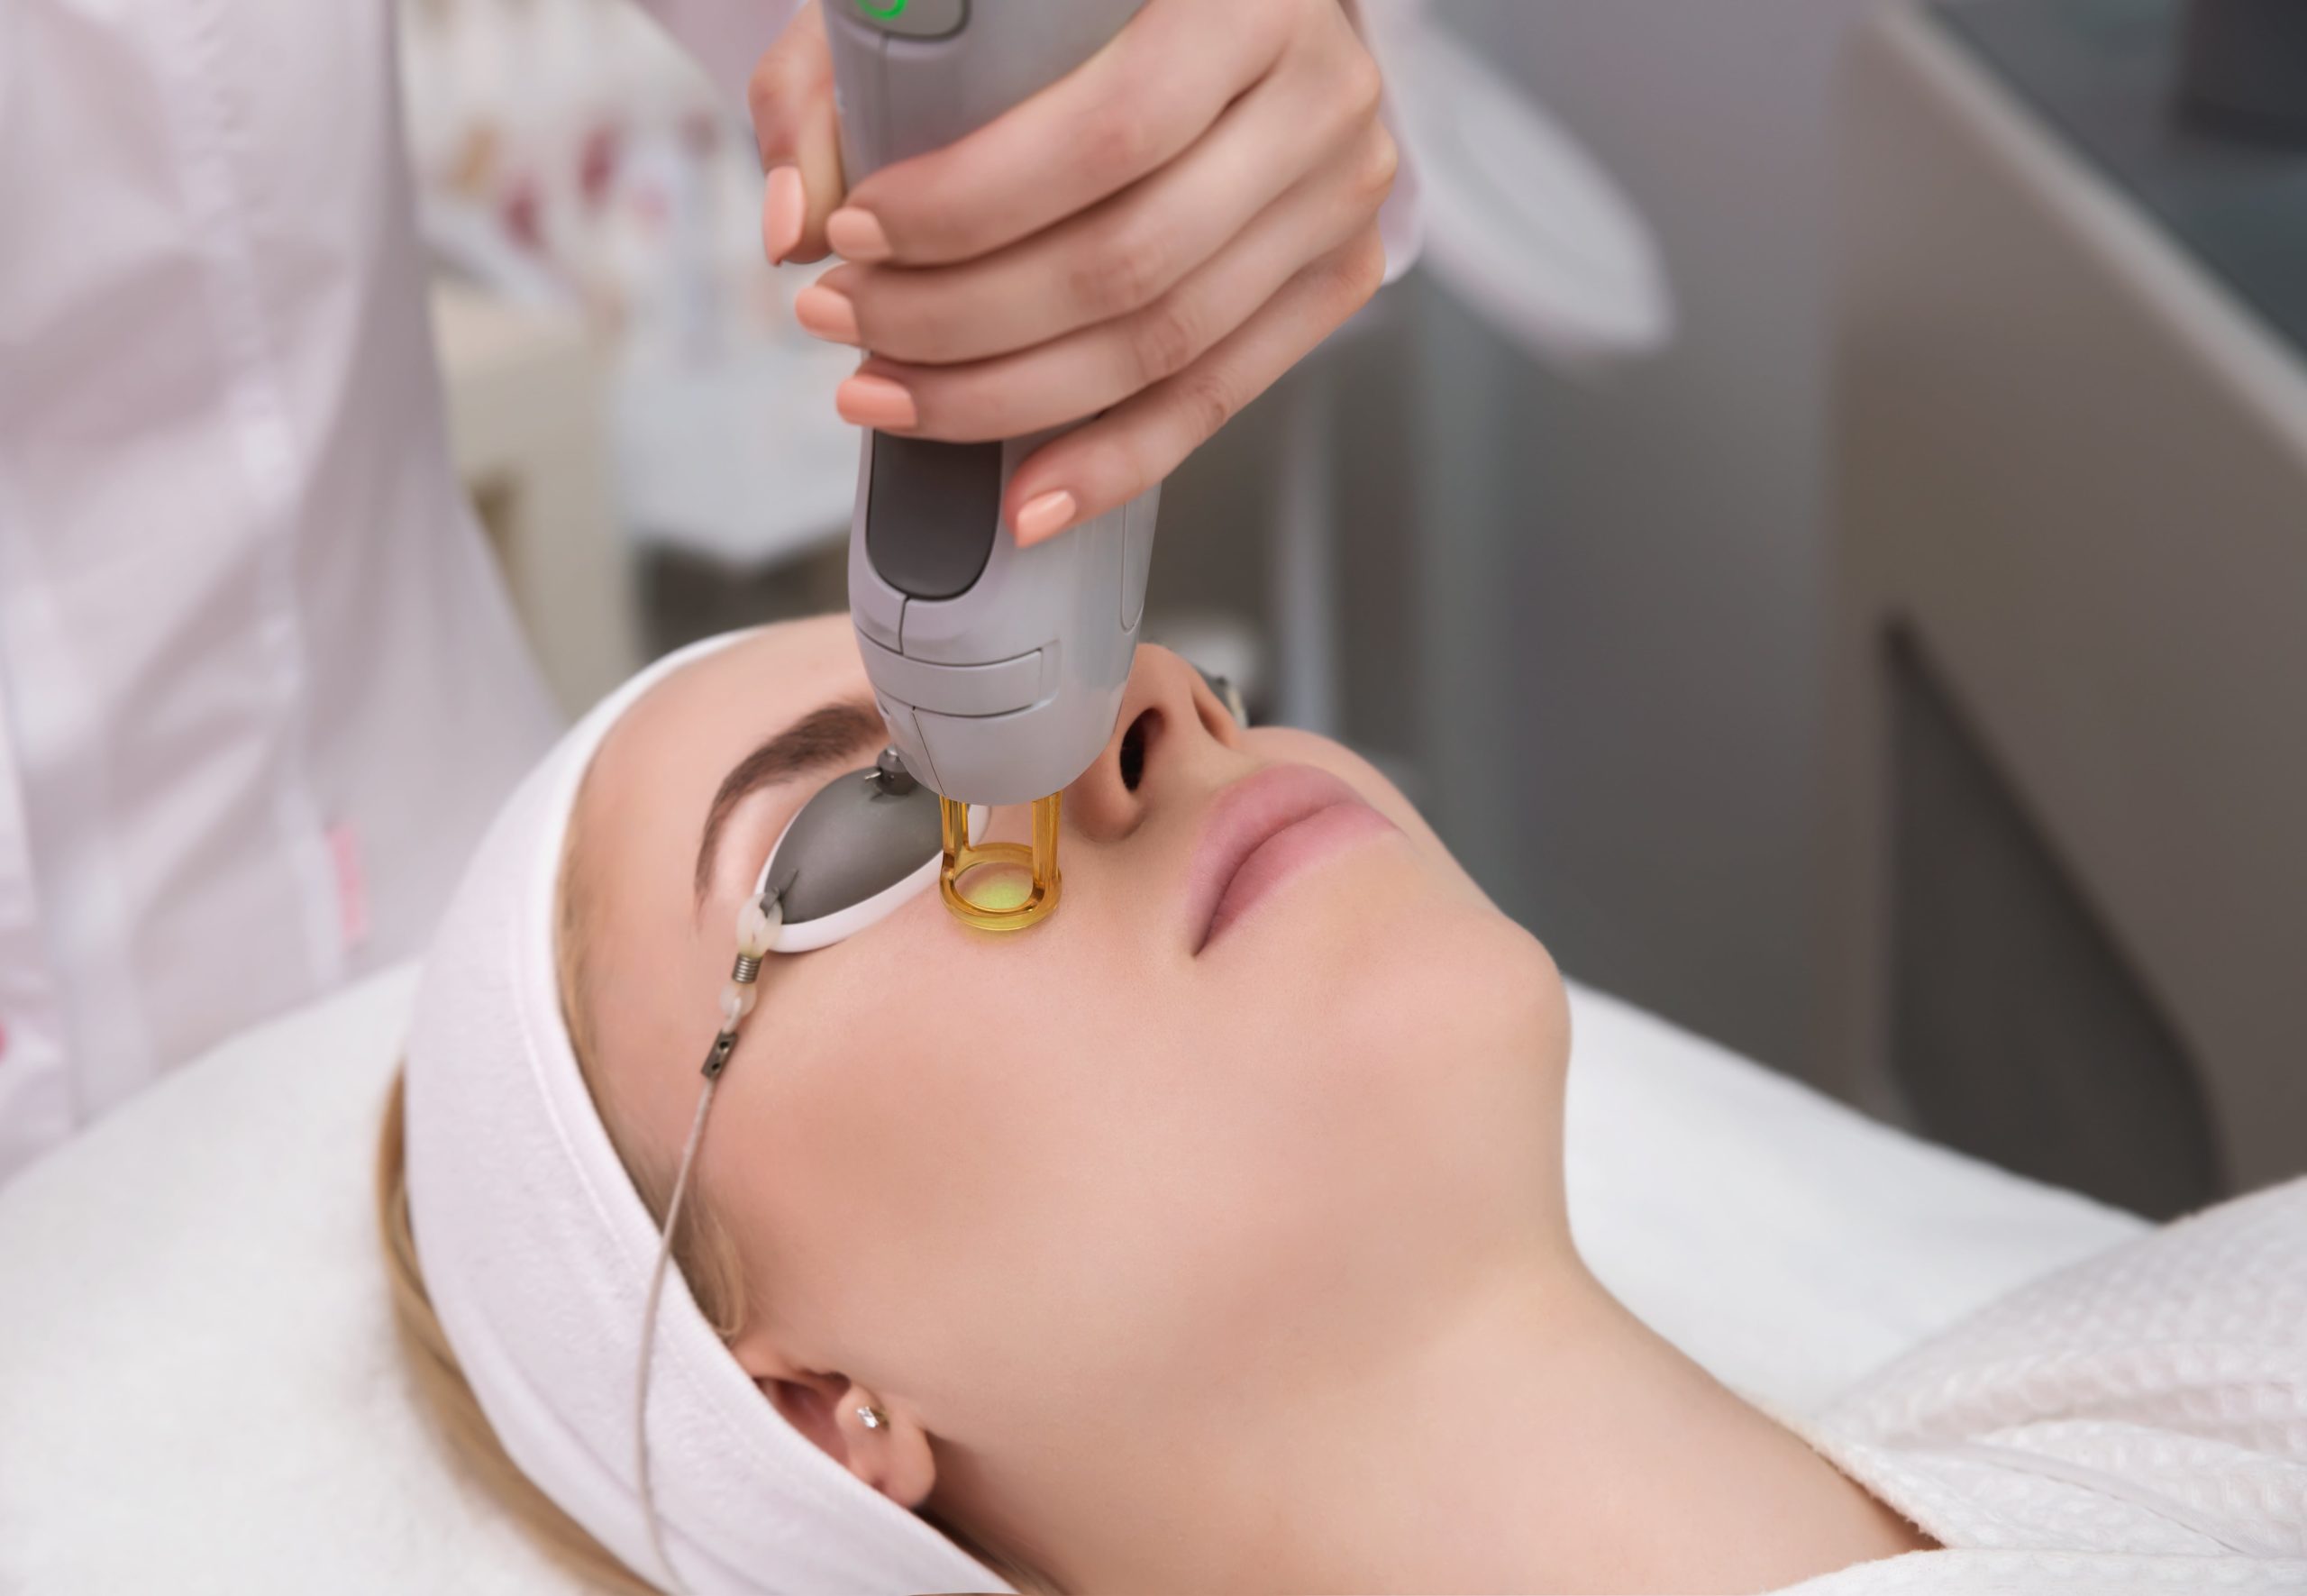 How Lumecca Photofacial Can Revitalize Your Appearance